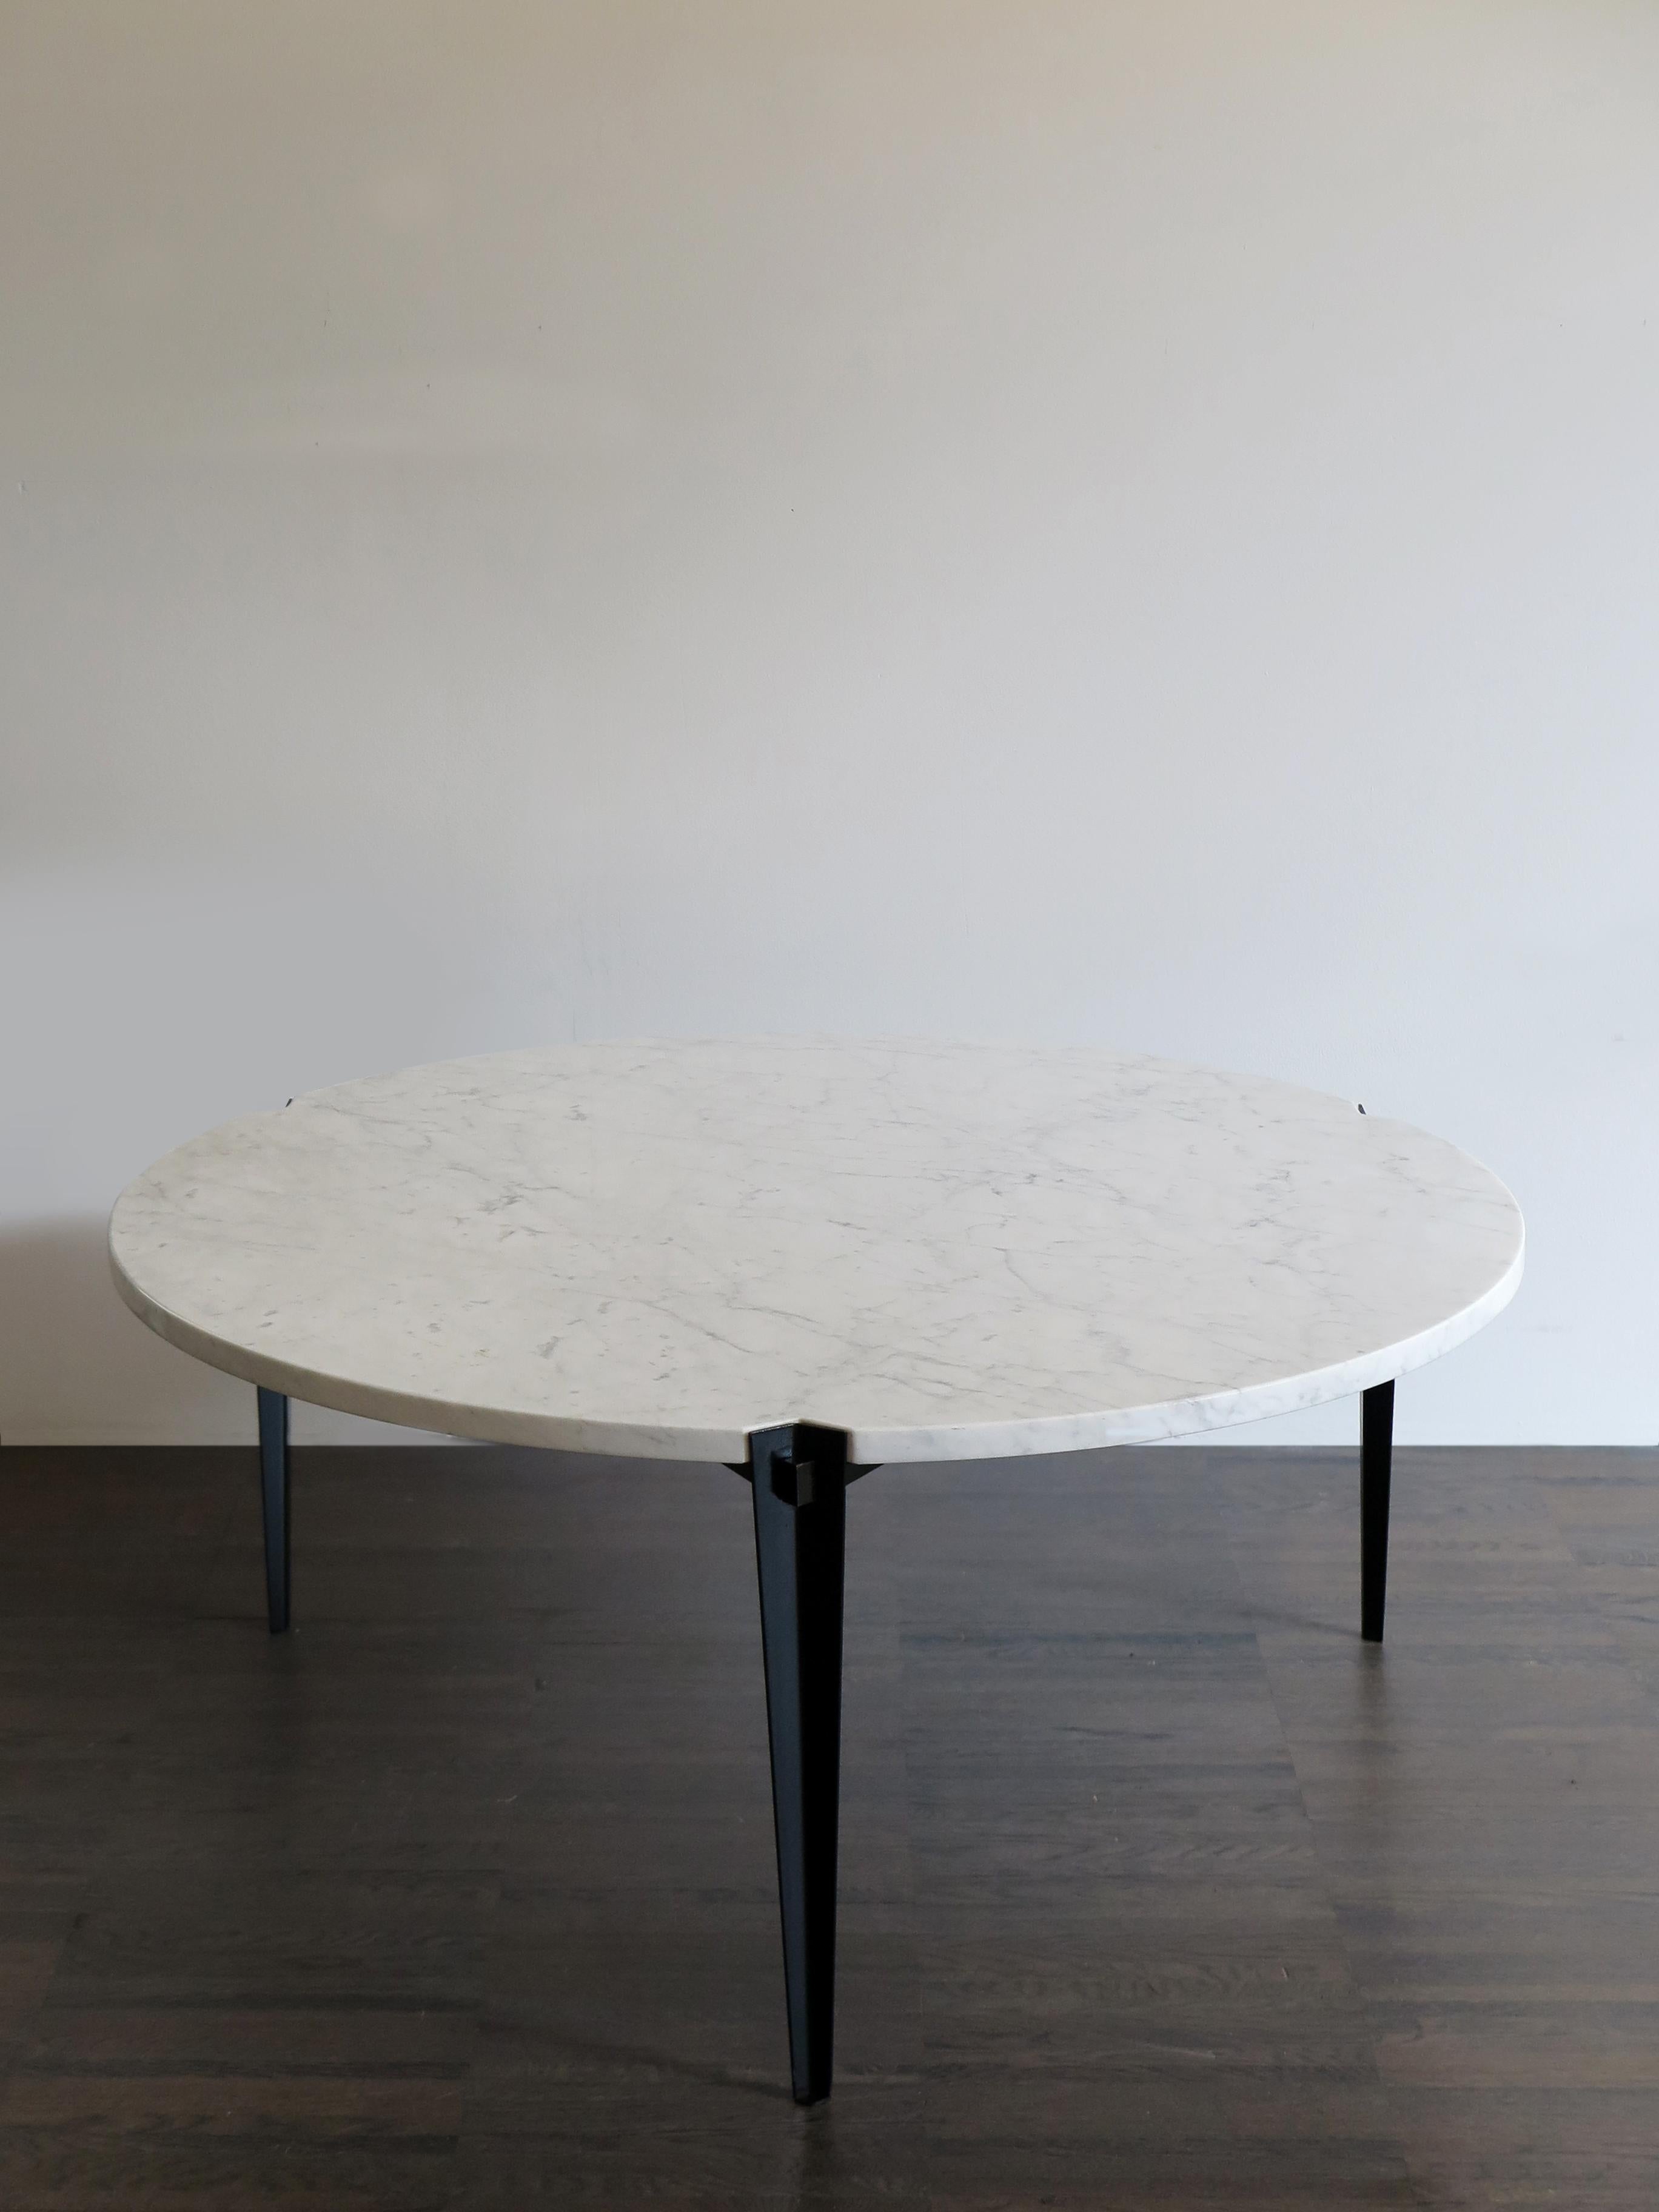 Italian Mid-Century Modern design “T61c” round big side table, sofa table or coffee table designed by Osvaldo Borsani for Tecno with white marble top (Carrara marble) and bent sheet metal legs fixed to a metal frame on which the marble top is